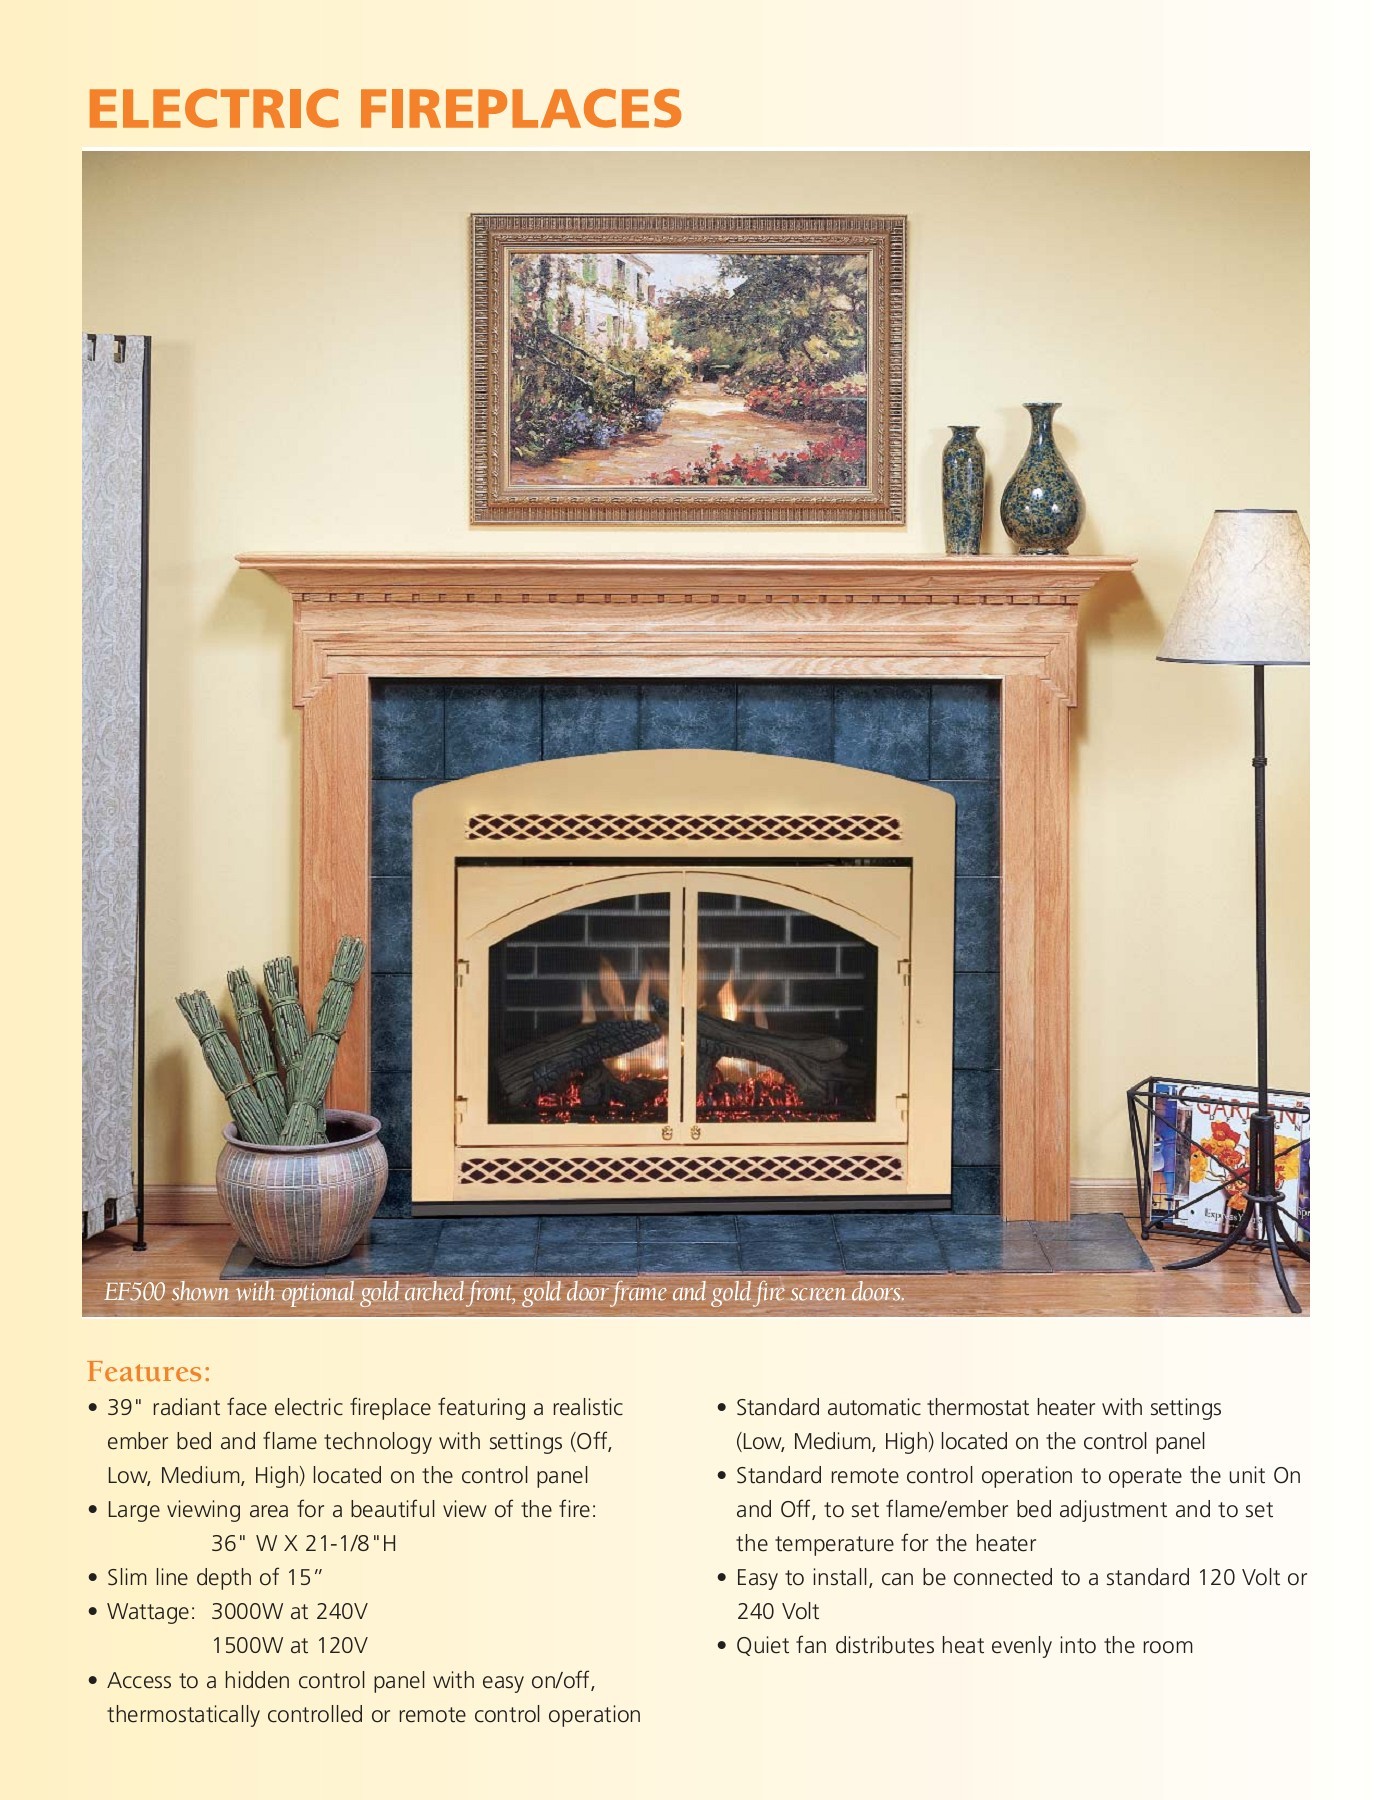 Arched Fireplace Door Elegant Ef500 Shown with Optional Pewter Arched Front Black Door